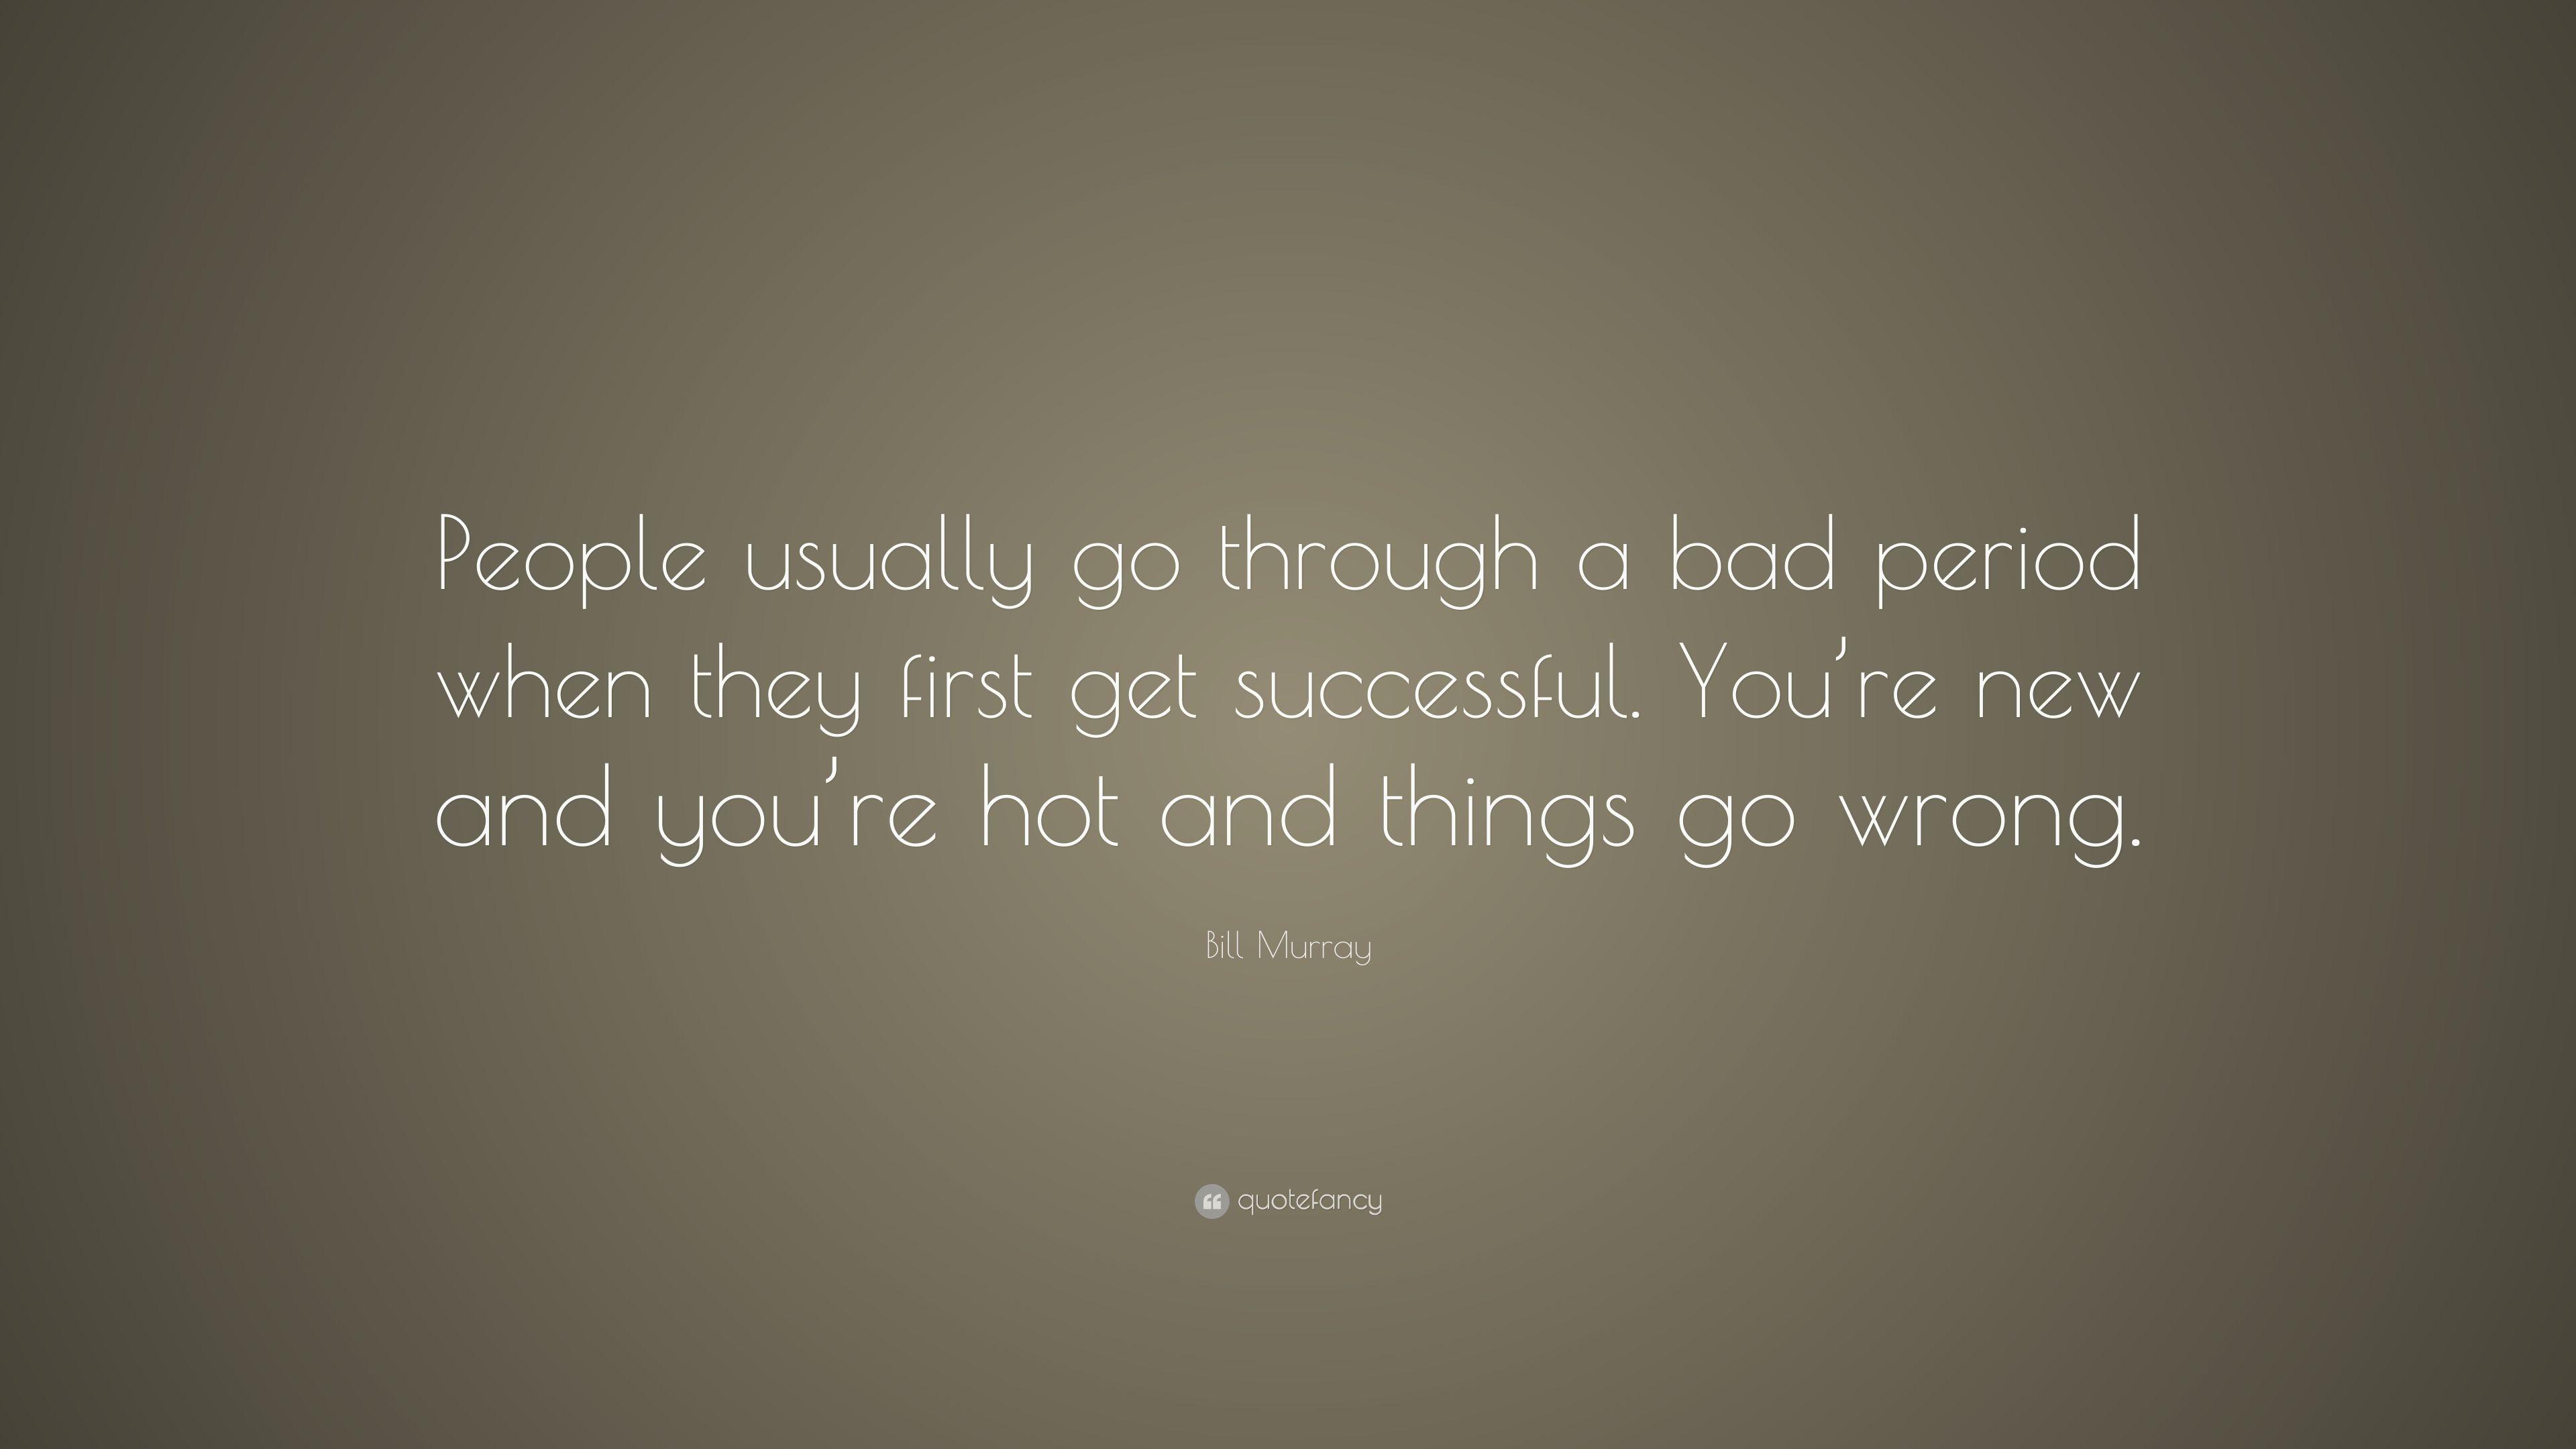 Bill Murray Quote: “People usually go through a bad period when